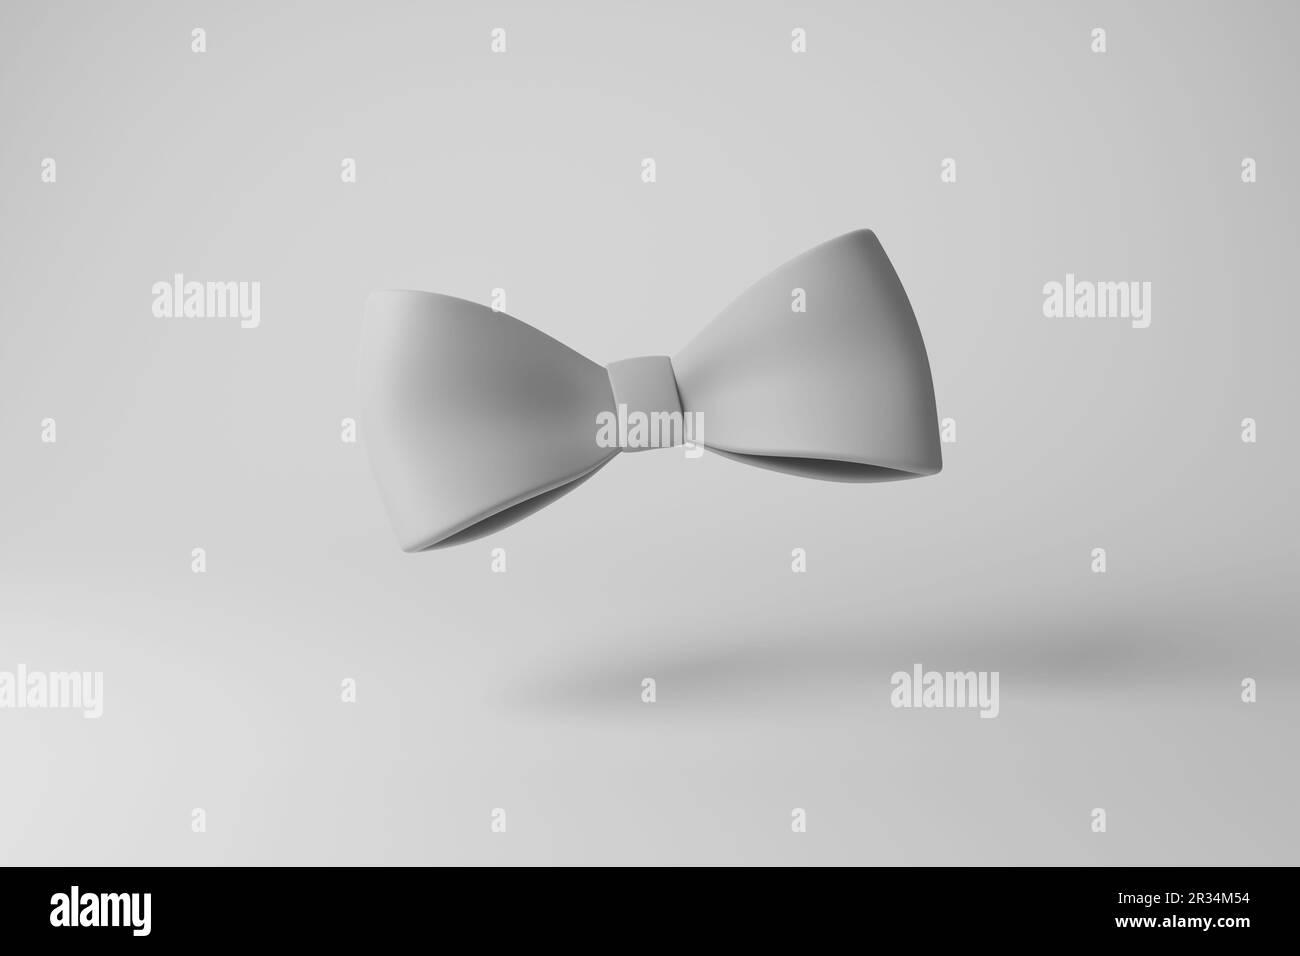 White bowtie casting shadow on white background creating greyscale monochrome. The concept of minimalism, dress code, formal events  and courtesy Stock Photo